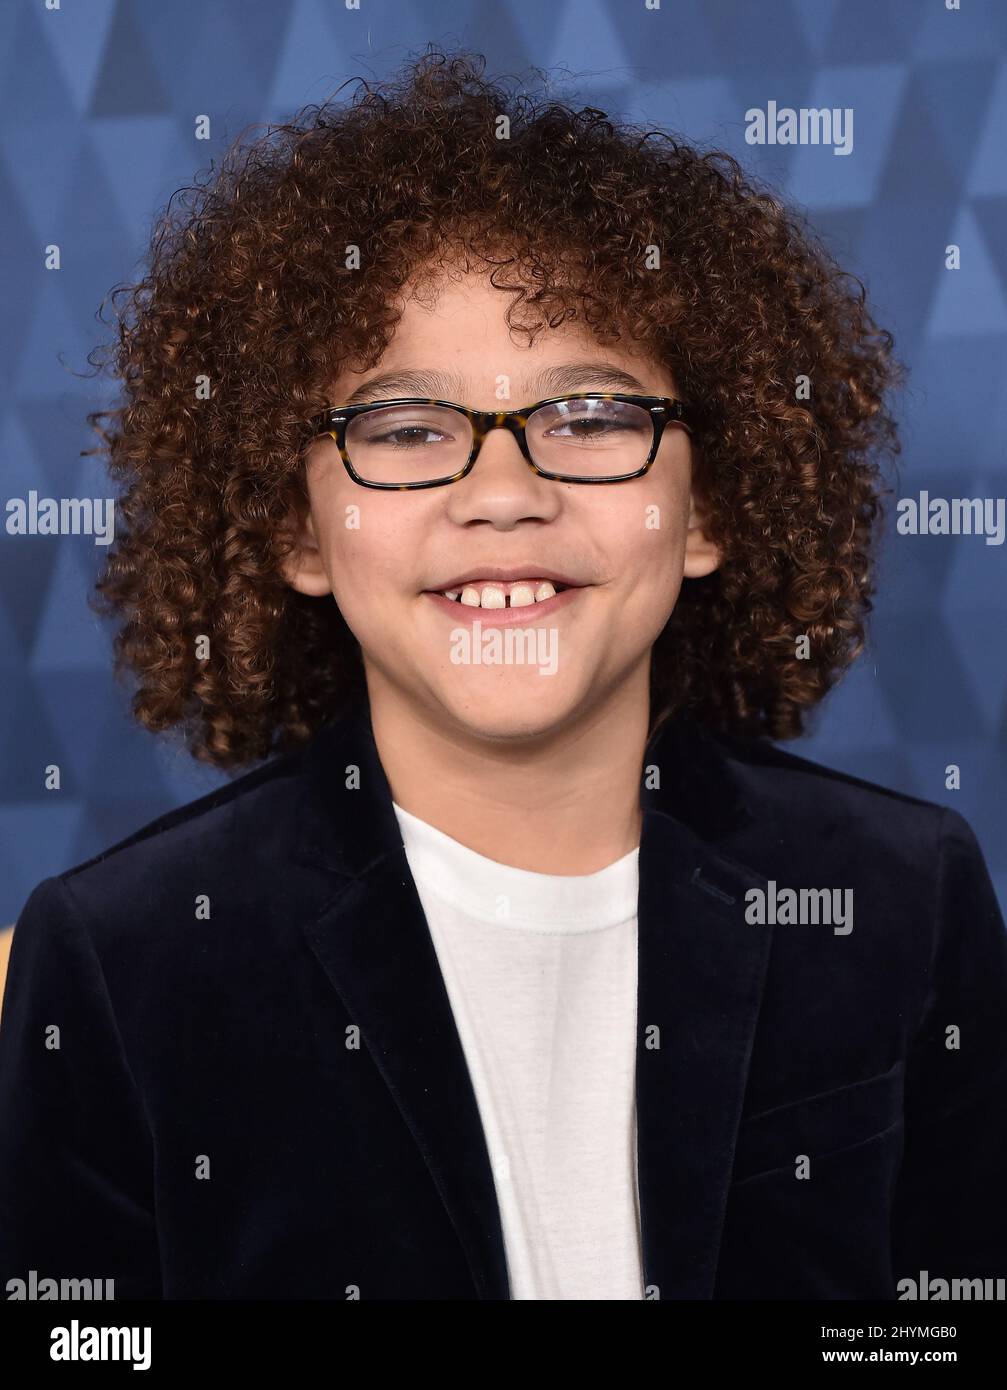 Ethan William Childress at the ABC Winter TCA 2020 Arrivals Carpet held at the Langham Huntington Hotel Stock Photo